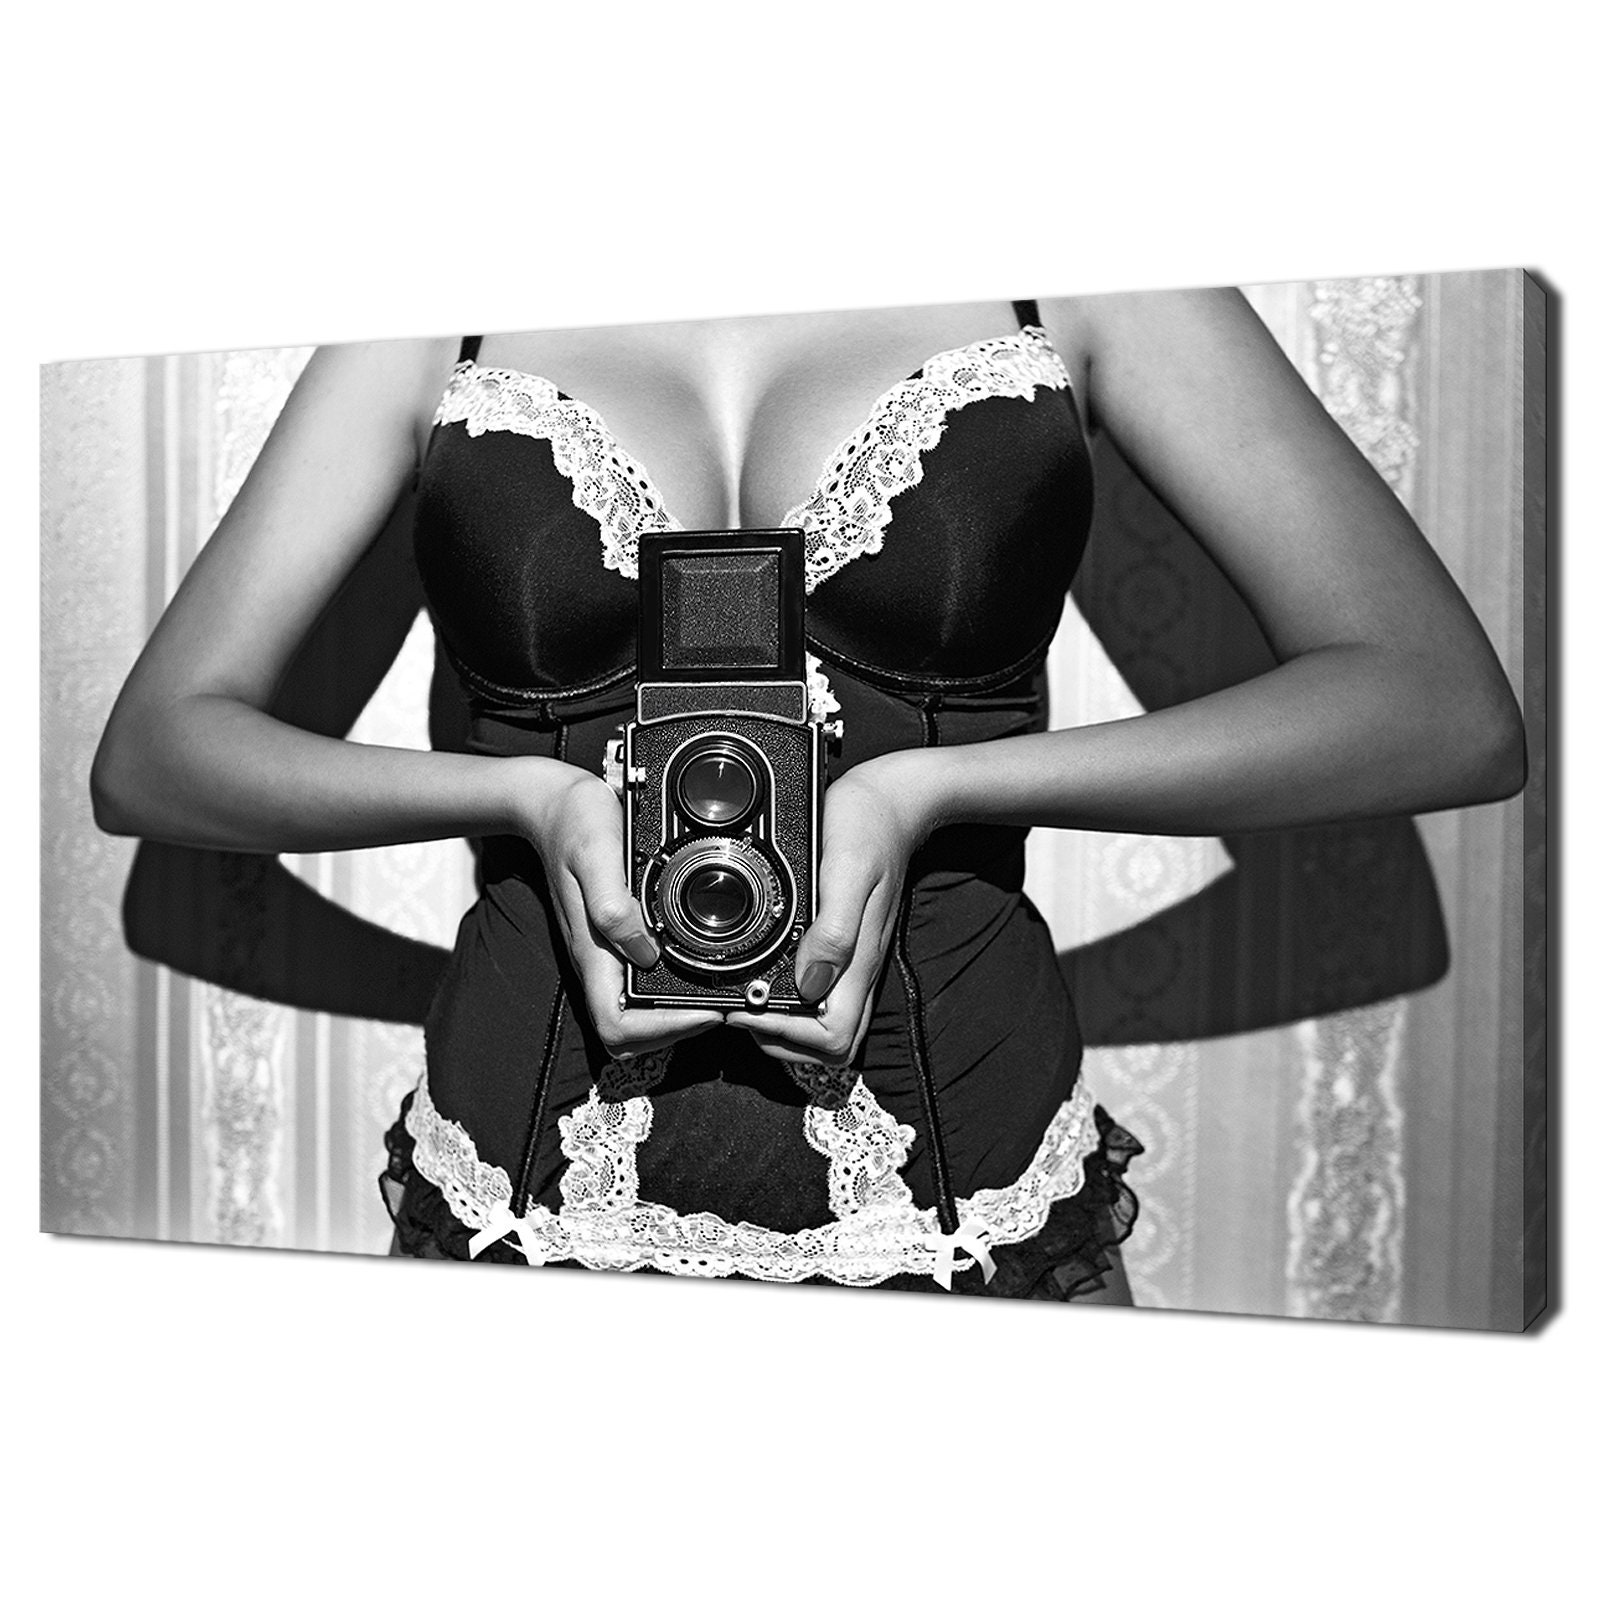 Woman Holding Big Tits at Vintage Wall Stock Photo - Image of luxury, high:  51343738